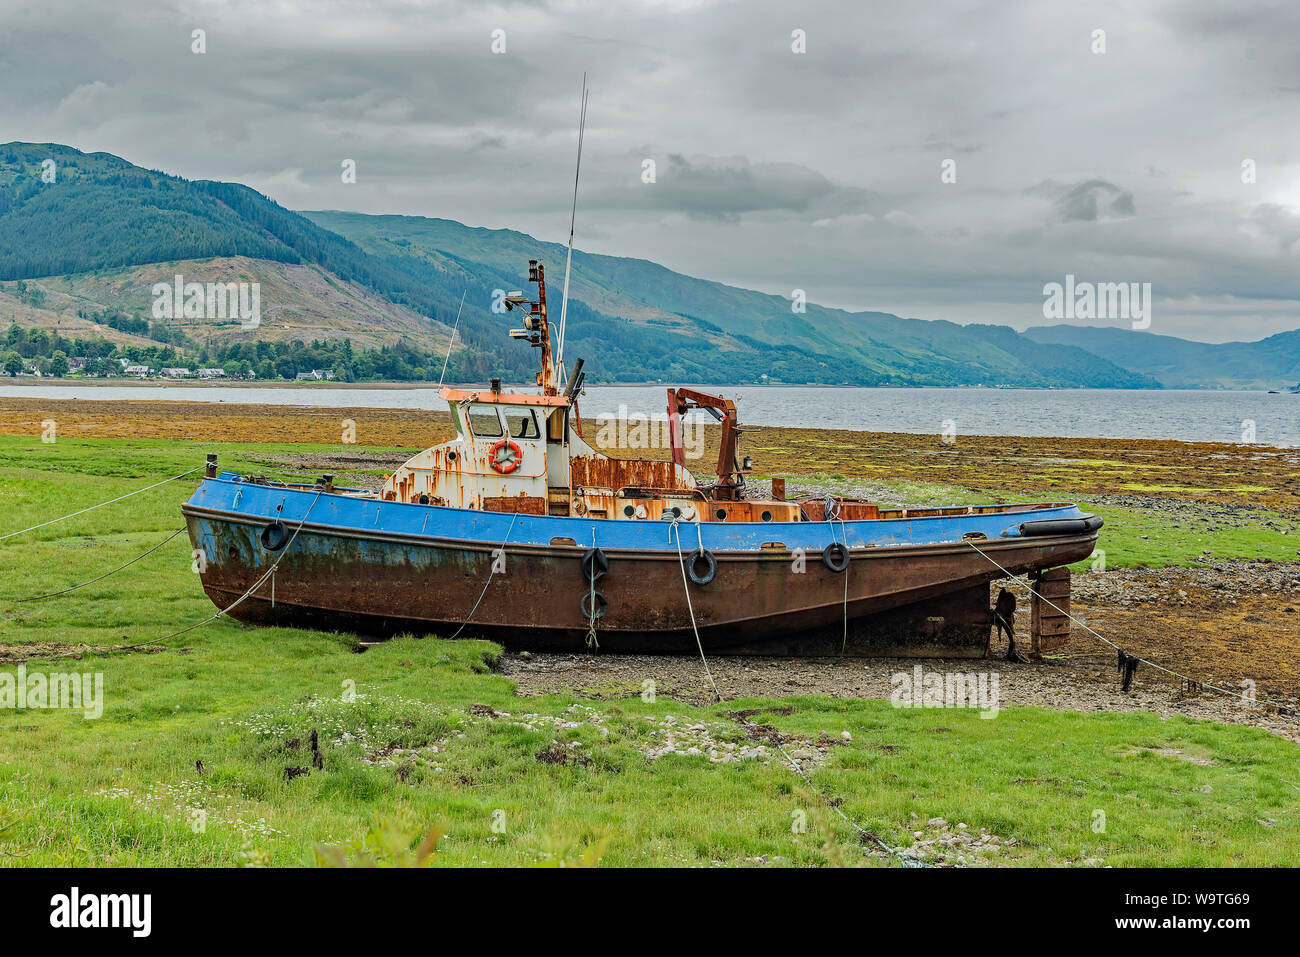 Tugboat on the shores of Loch Duich, Scotland - views Stock Photo